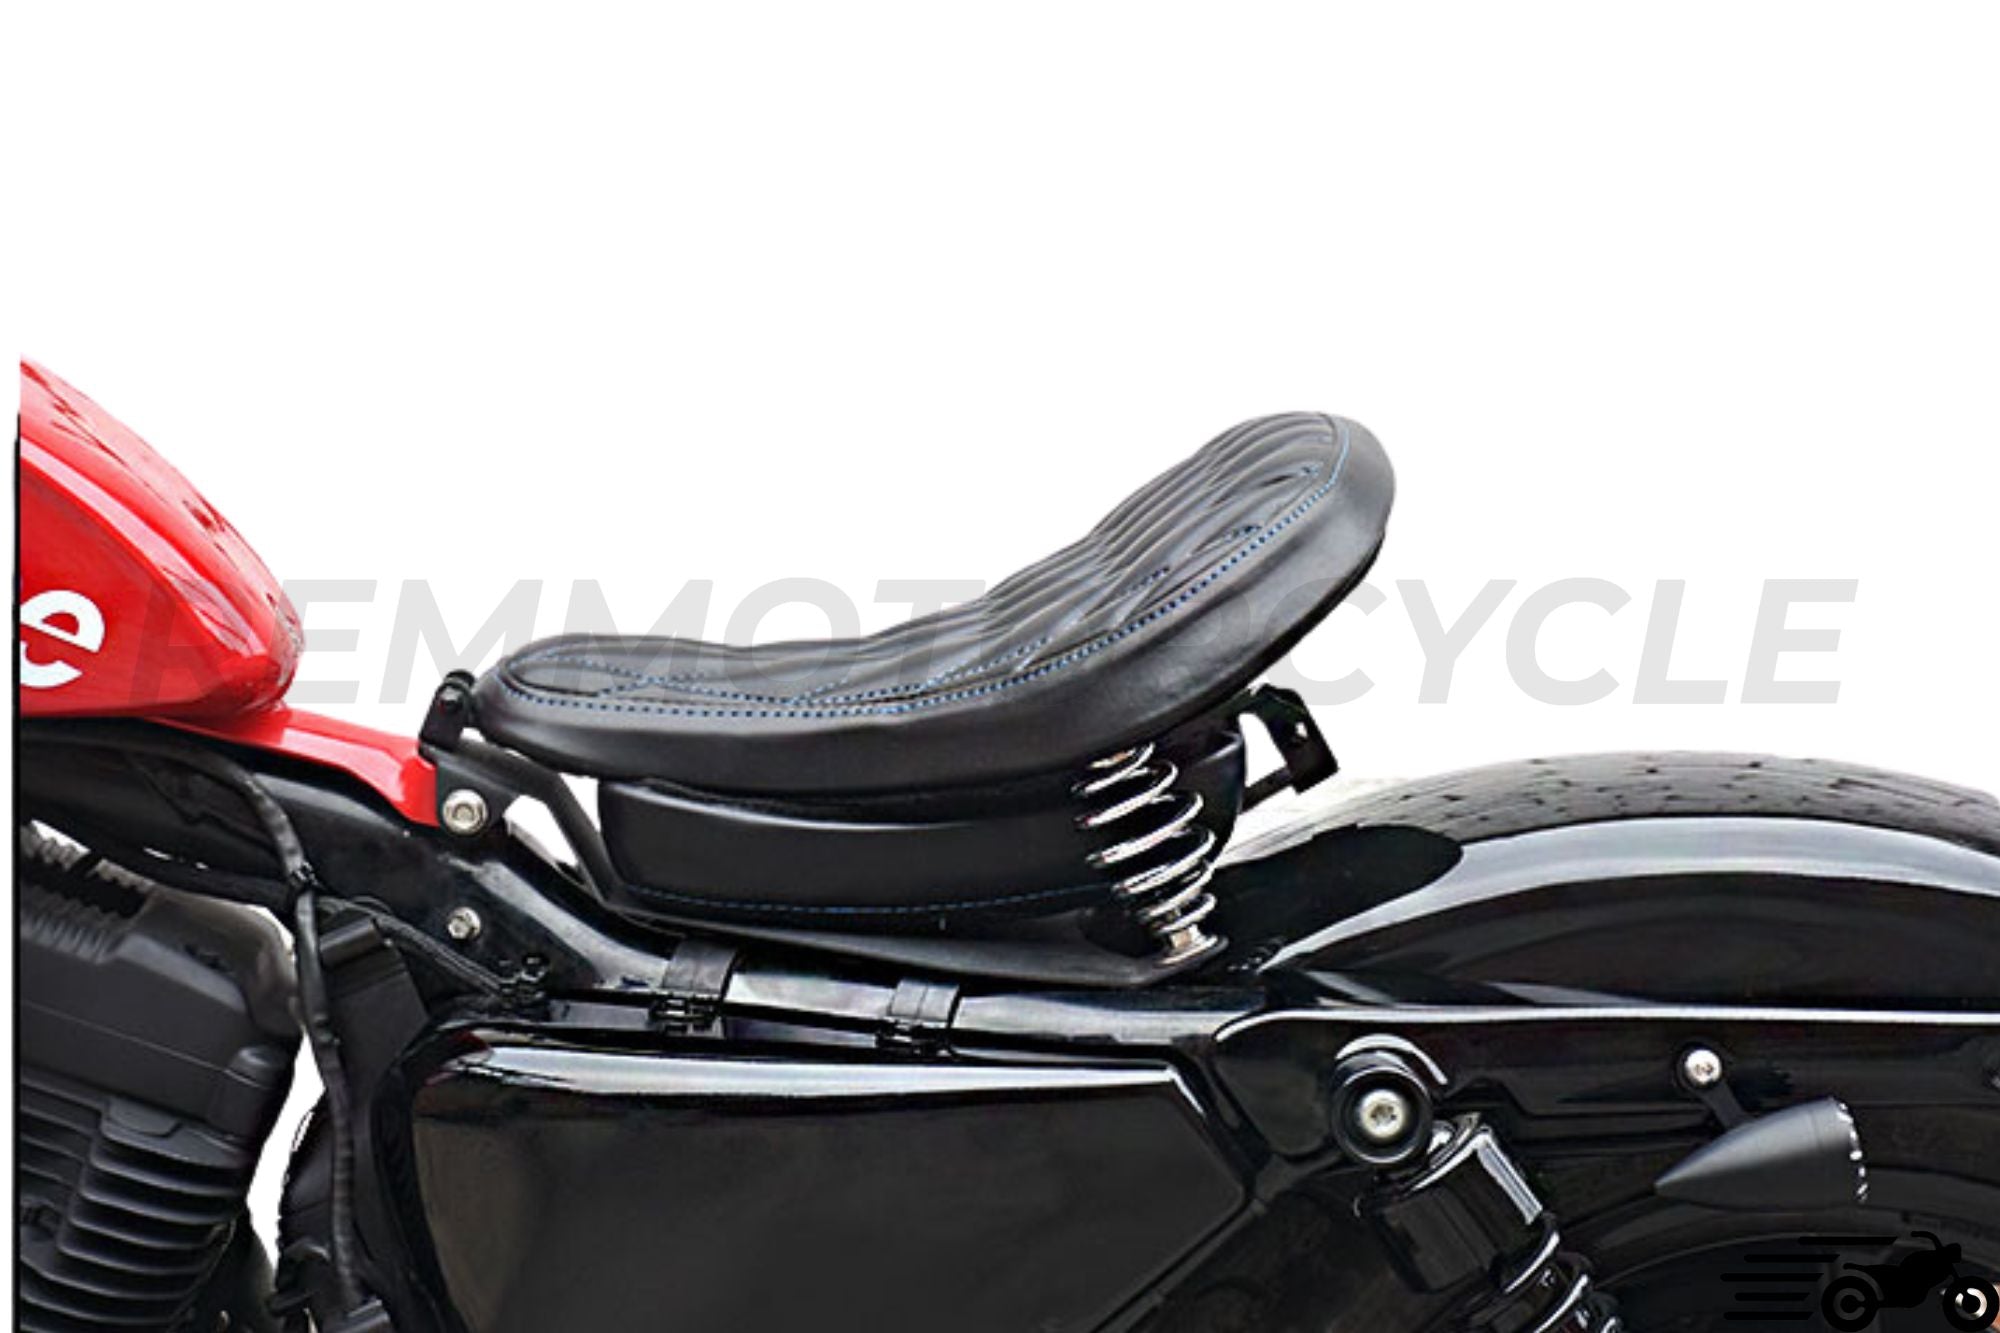 Solo Sportster Biplace nyereg